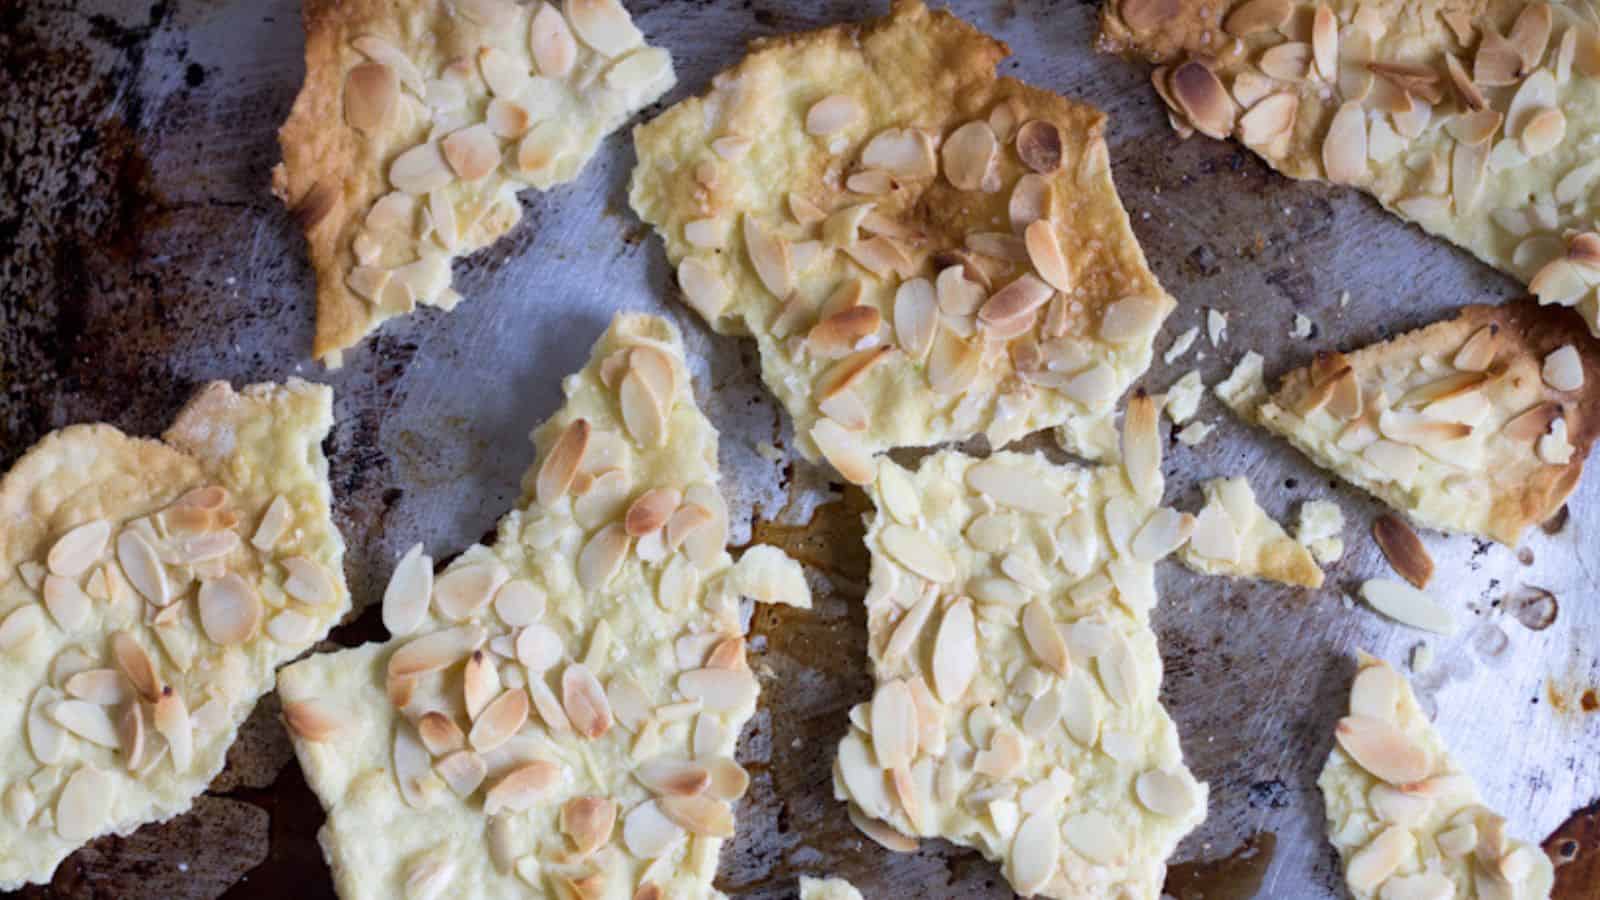 Sliced crackers with almonds on a baking sheet.